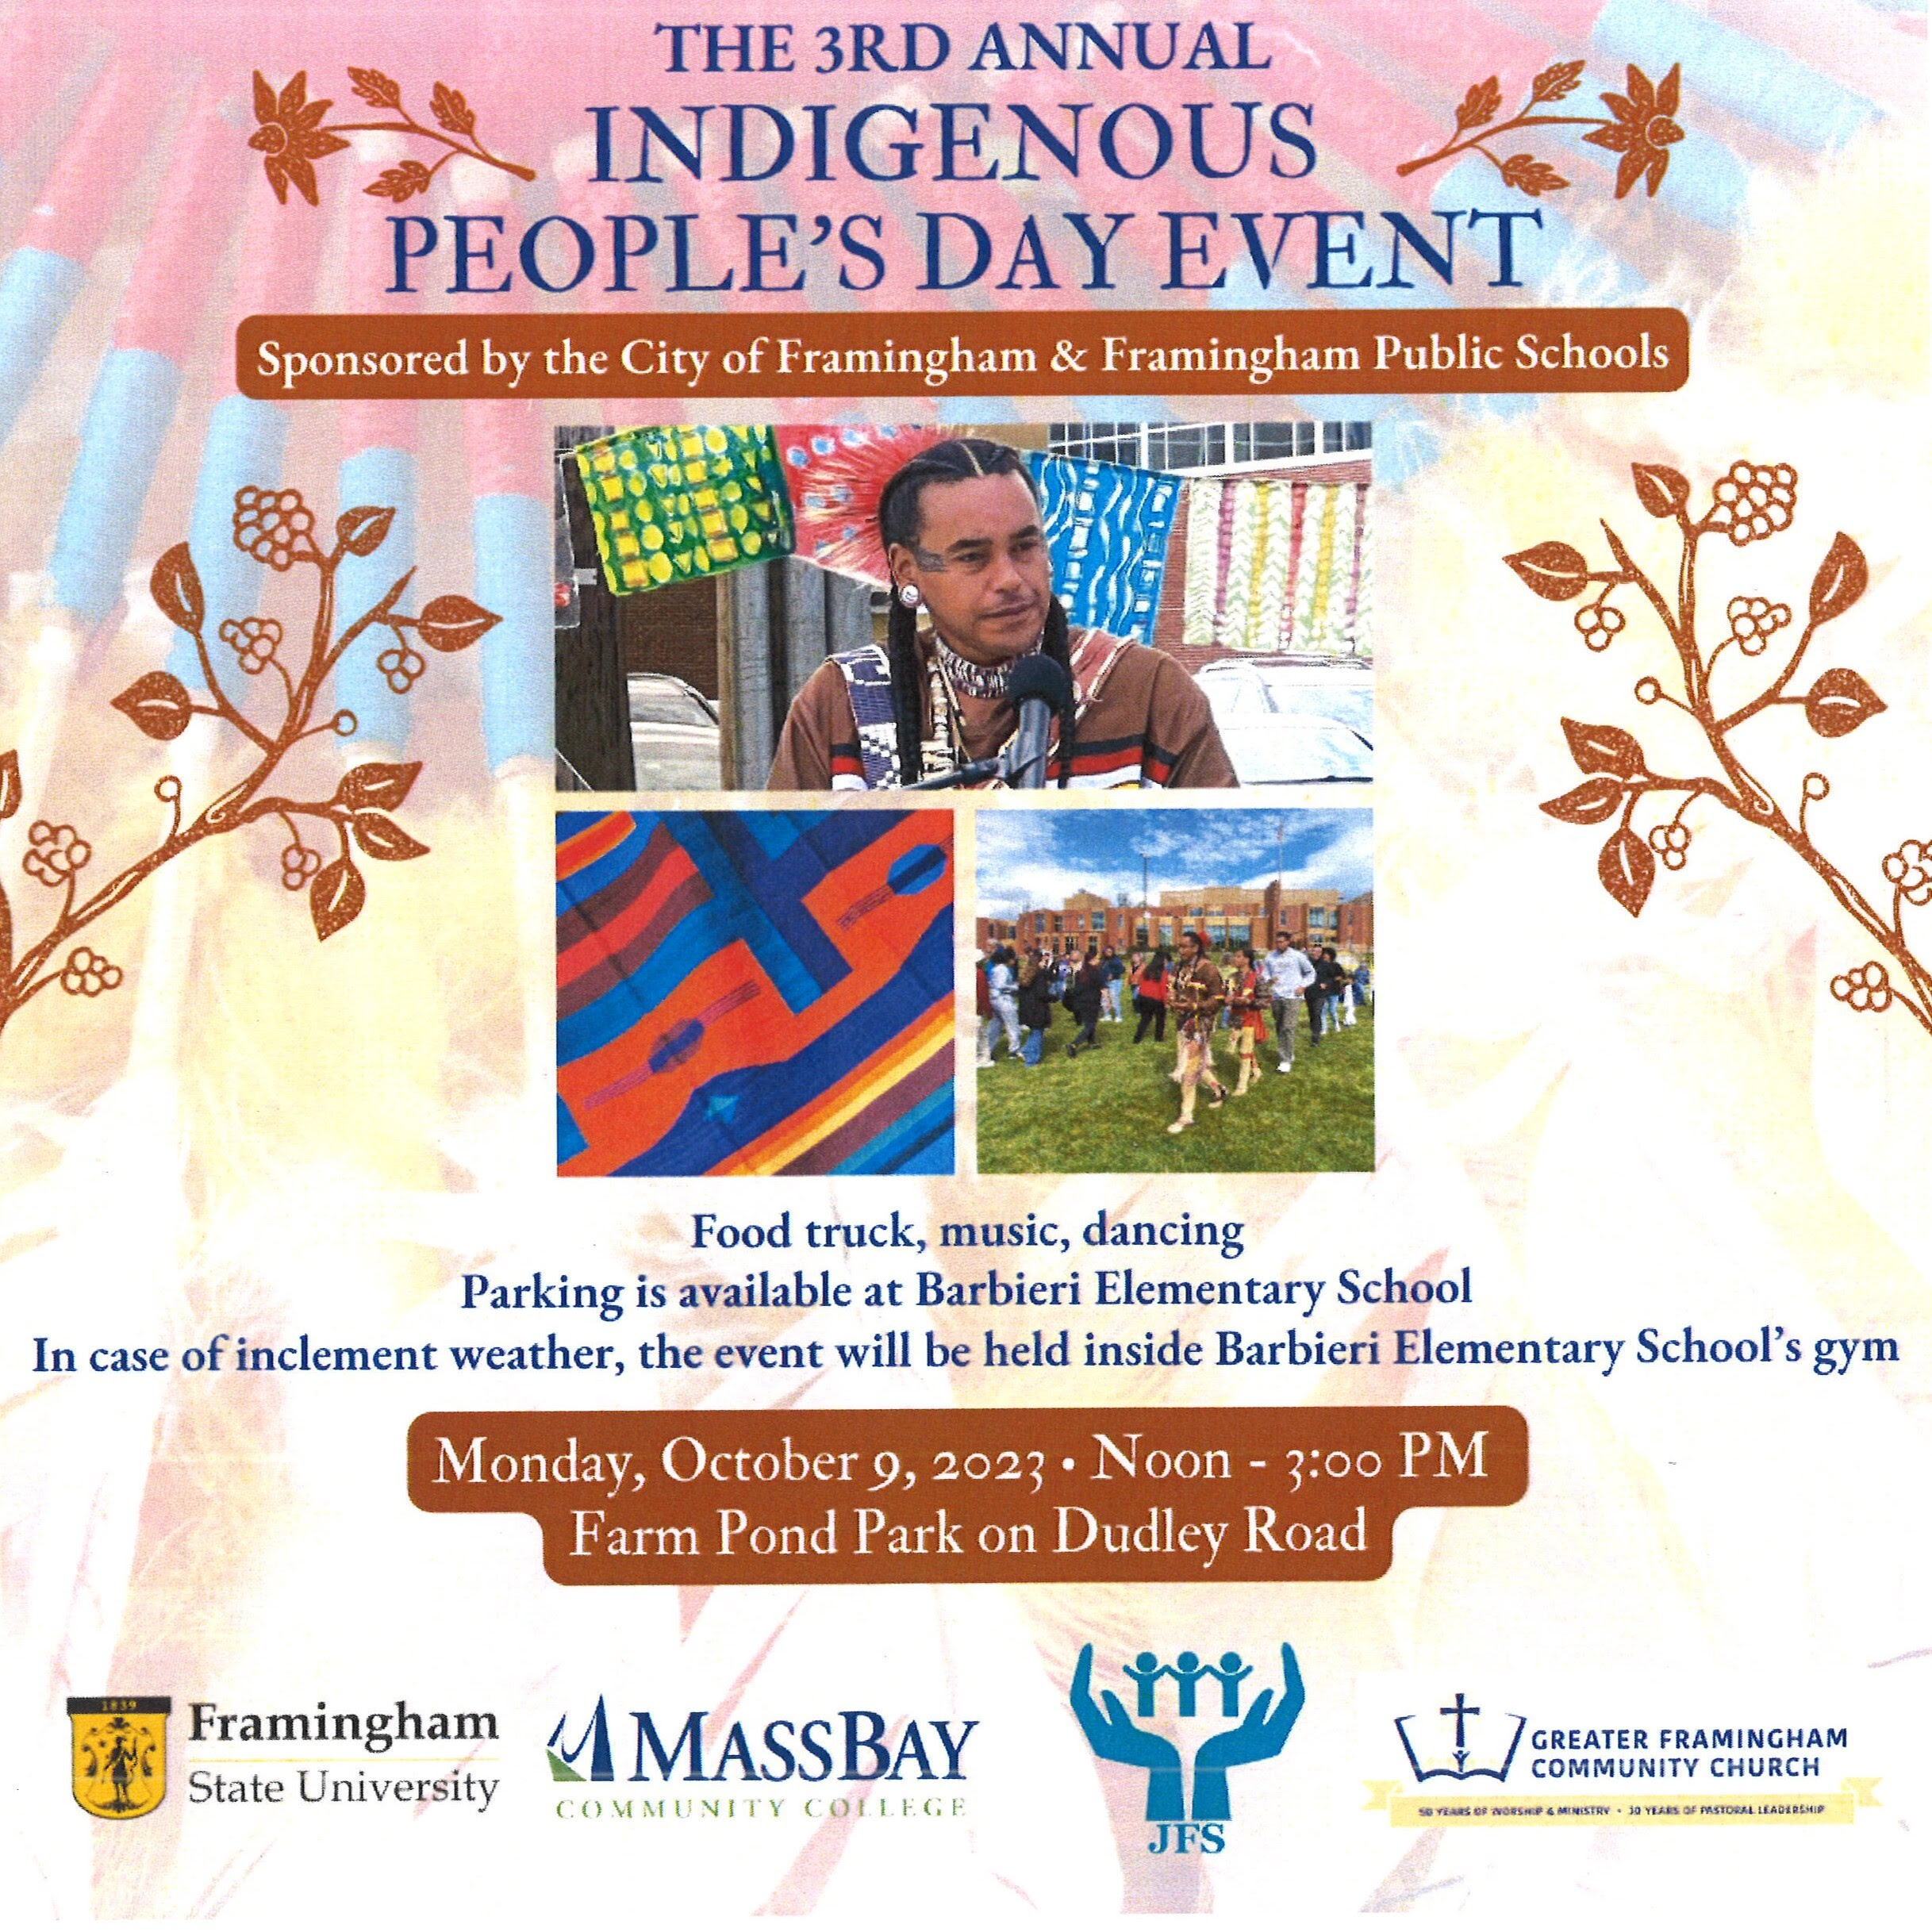 3RD ANNUAL INDIGENOUS PEOPLE DAY EVENT